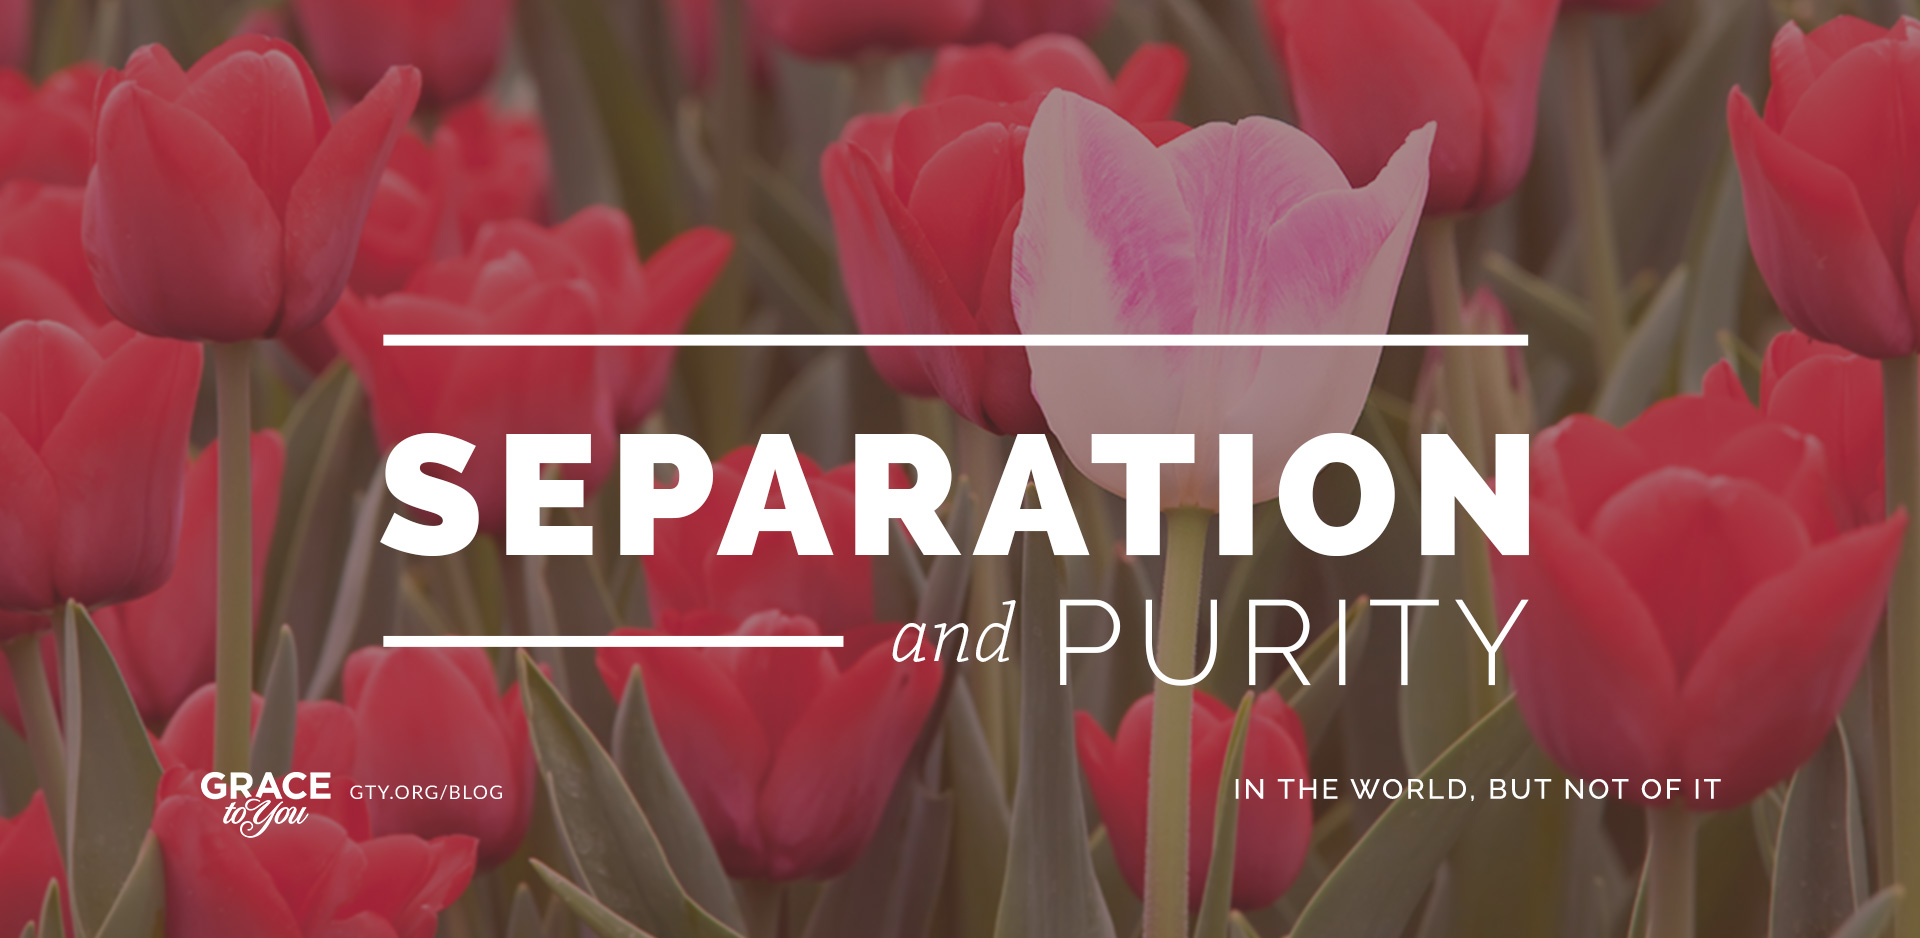 Separation and Purity